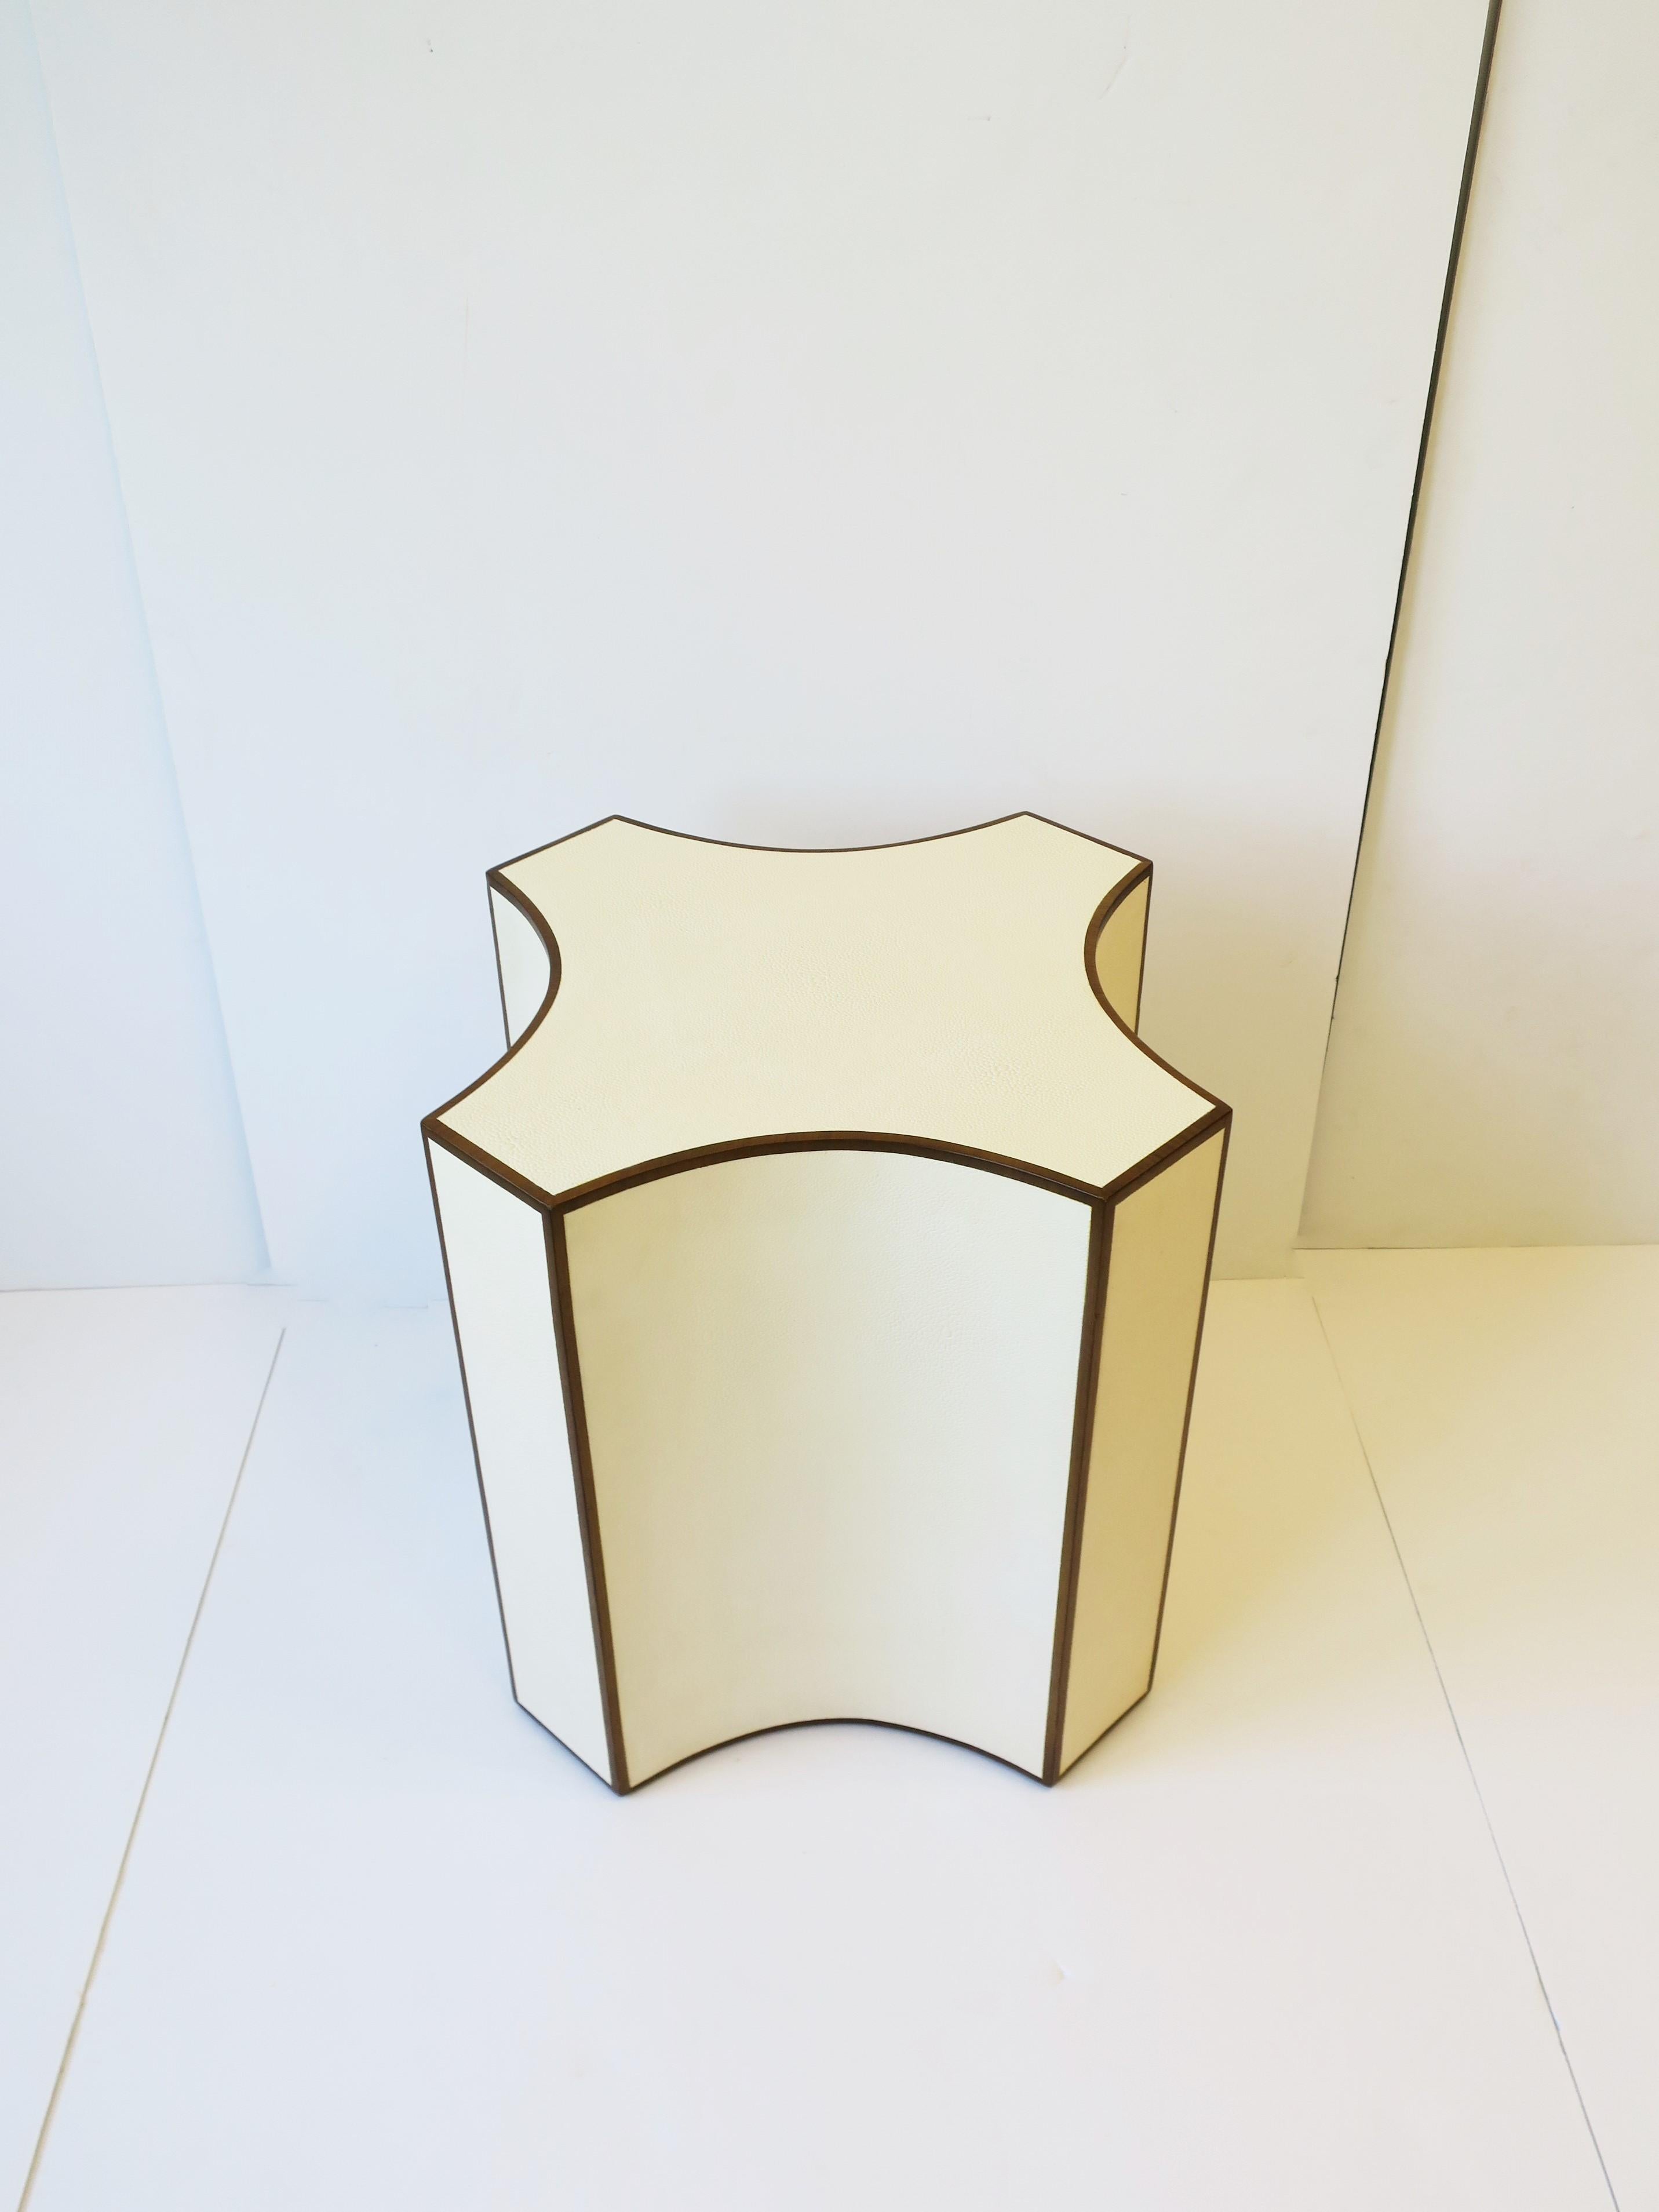 A beautiful geometric shagreen-esque (faux shagreen) pedestal side or drinks table in an off-white or cream hue complimented with a thin rich brown wood edge design. Table can be positioned two ways as show in images. 

Table measures: 16